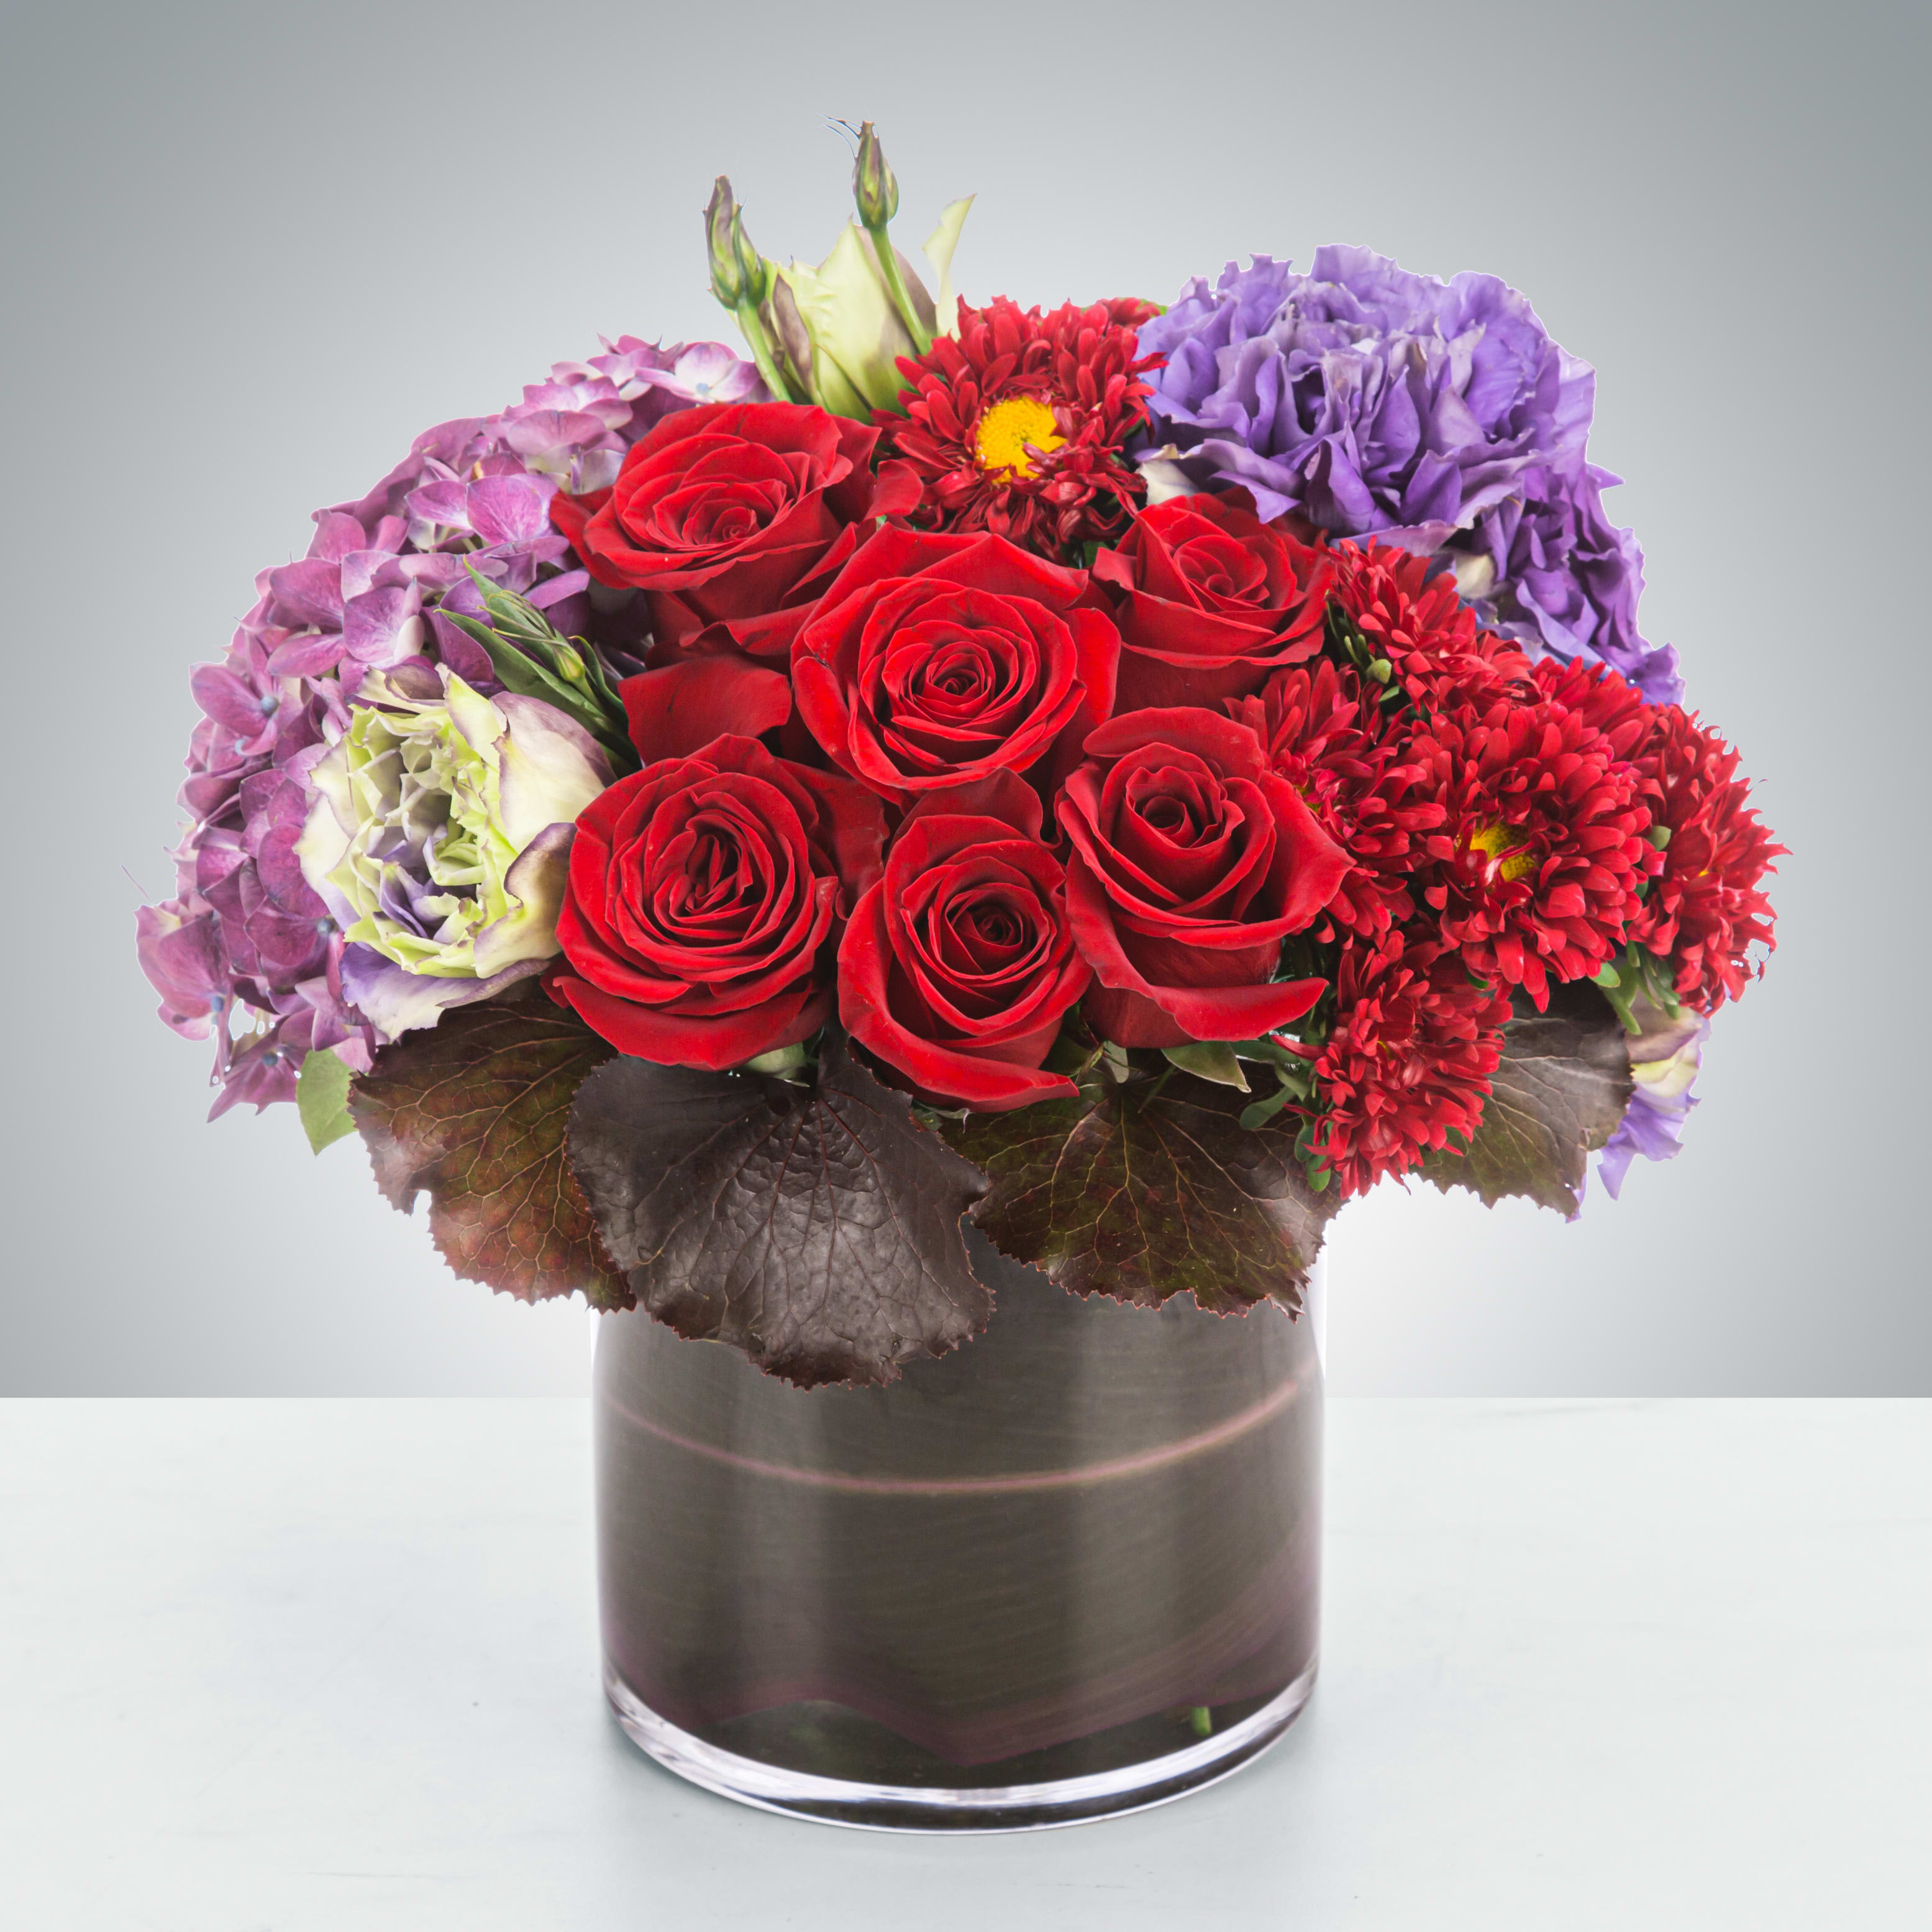 Garnet Bouquet - This deep jewel tone arrangement featuring red roses, purple hydrangea and purple lisianthus is nothing less of a dream! To congratulate for a job well done, a new baby on the way, a housewarming gift of just because, this bouquet’s versatility in beauty is a sure winner on any given occasion!  Approximately 10” D